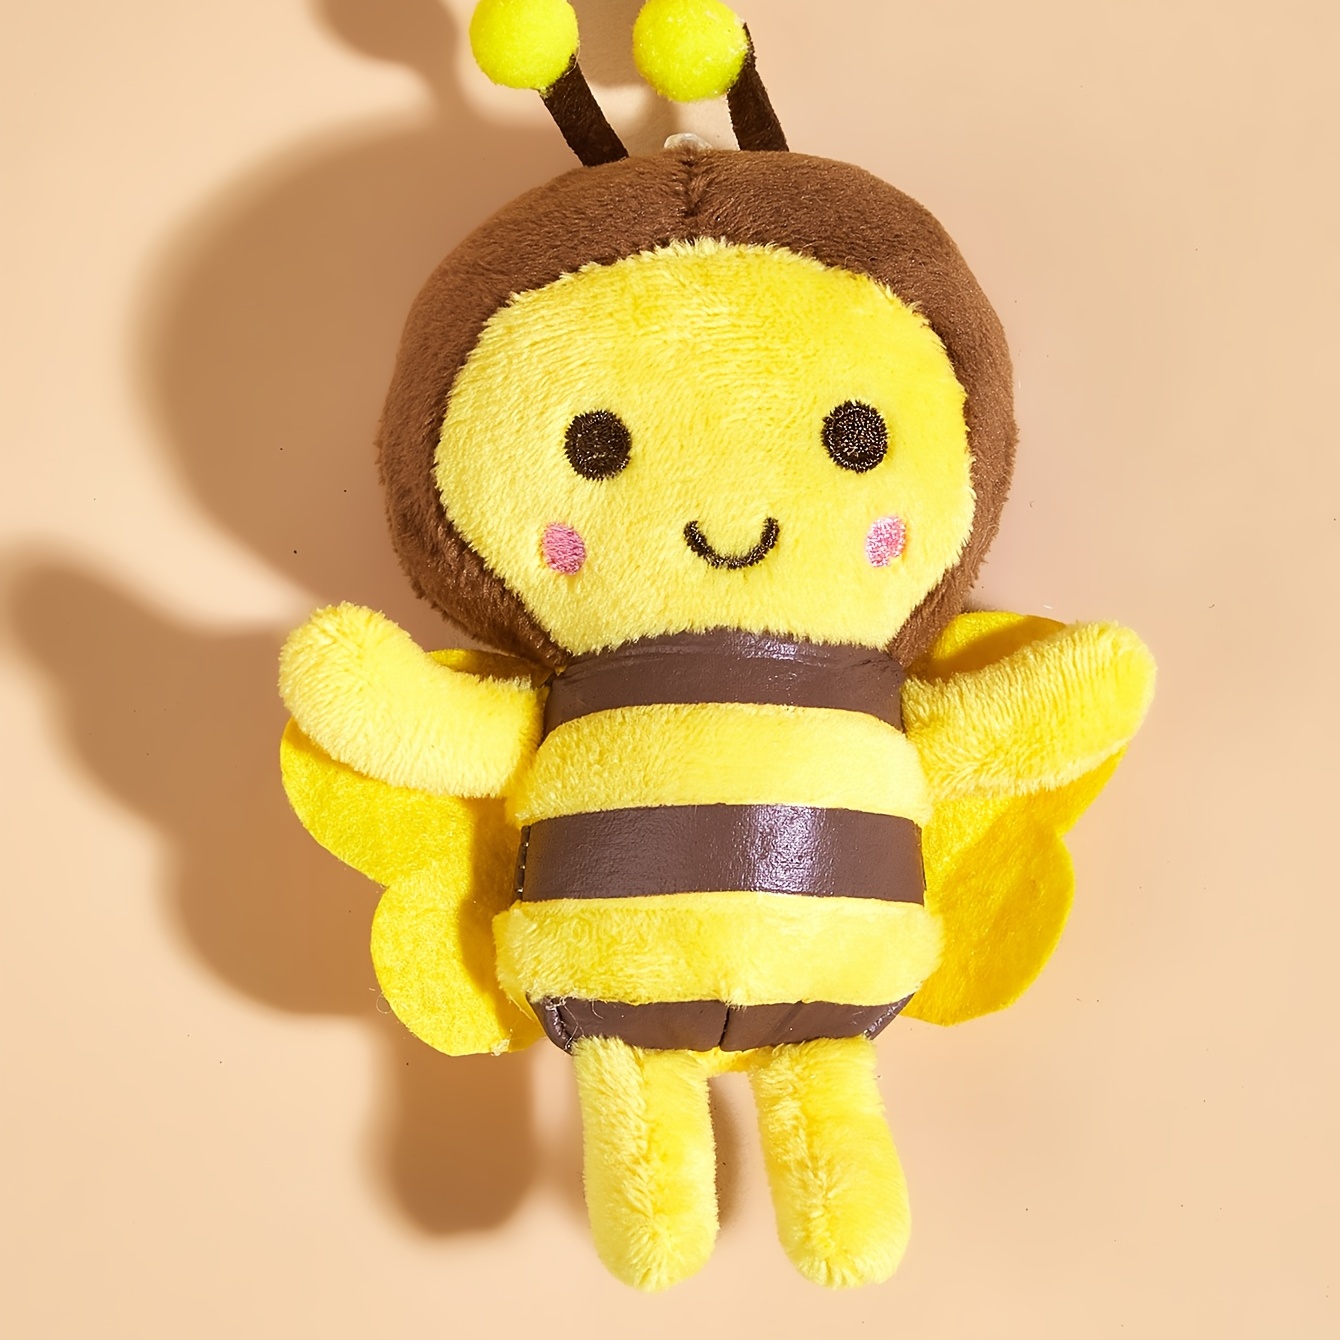 Adorable Plush Stuffed Bees: Realistic Cartoon Honey Bee Toy For Dogs